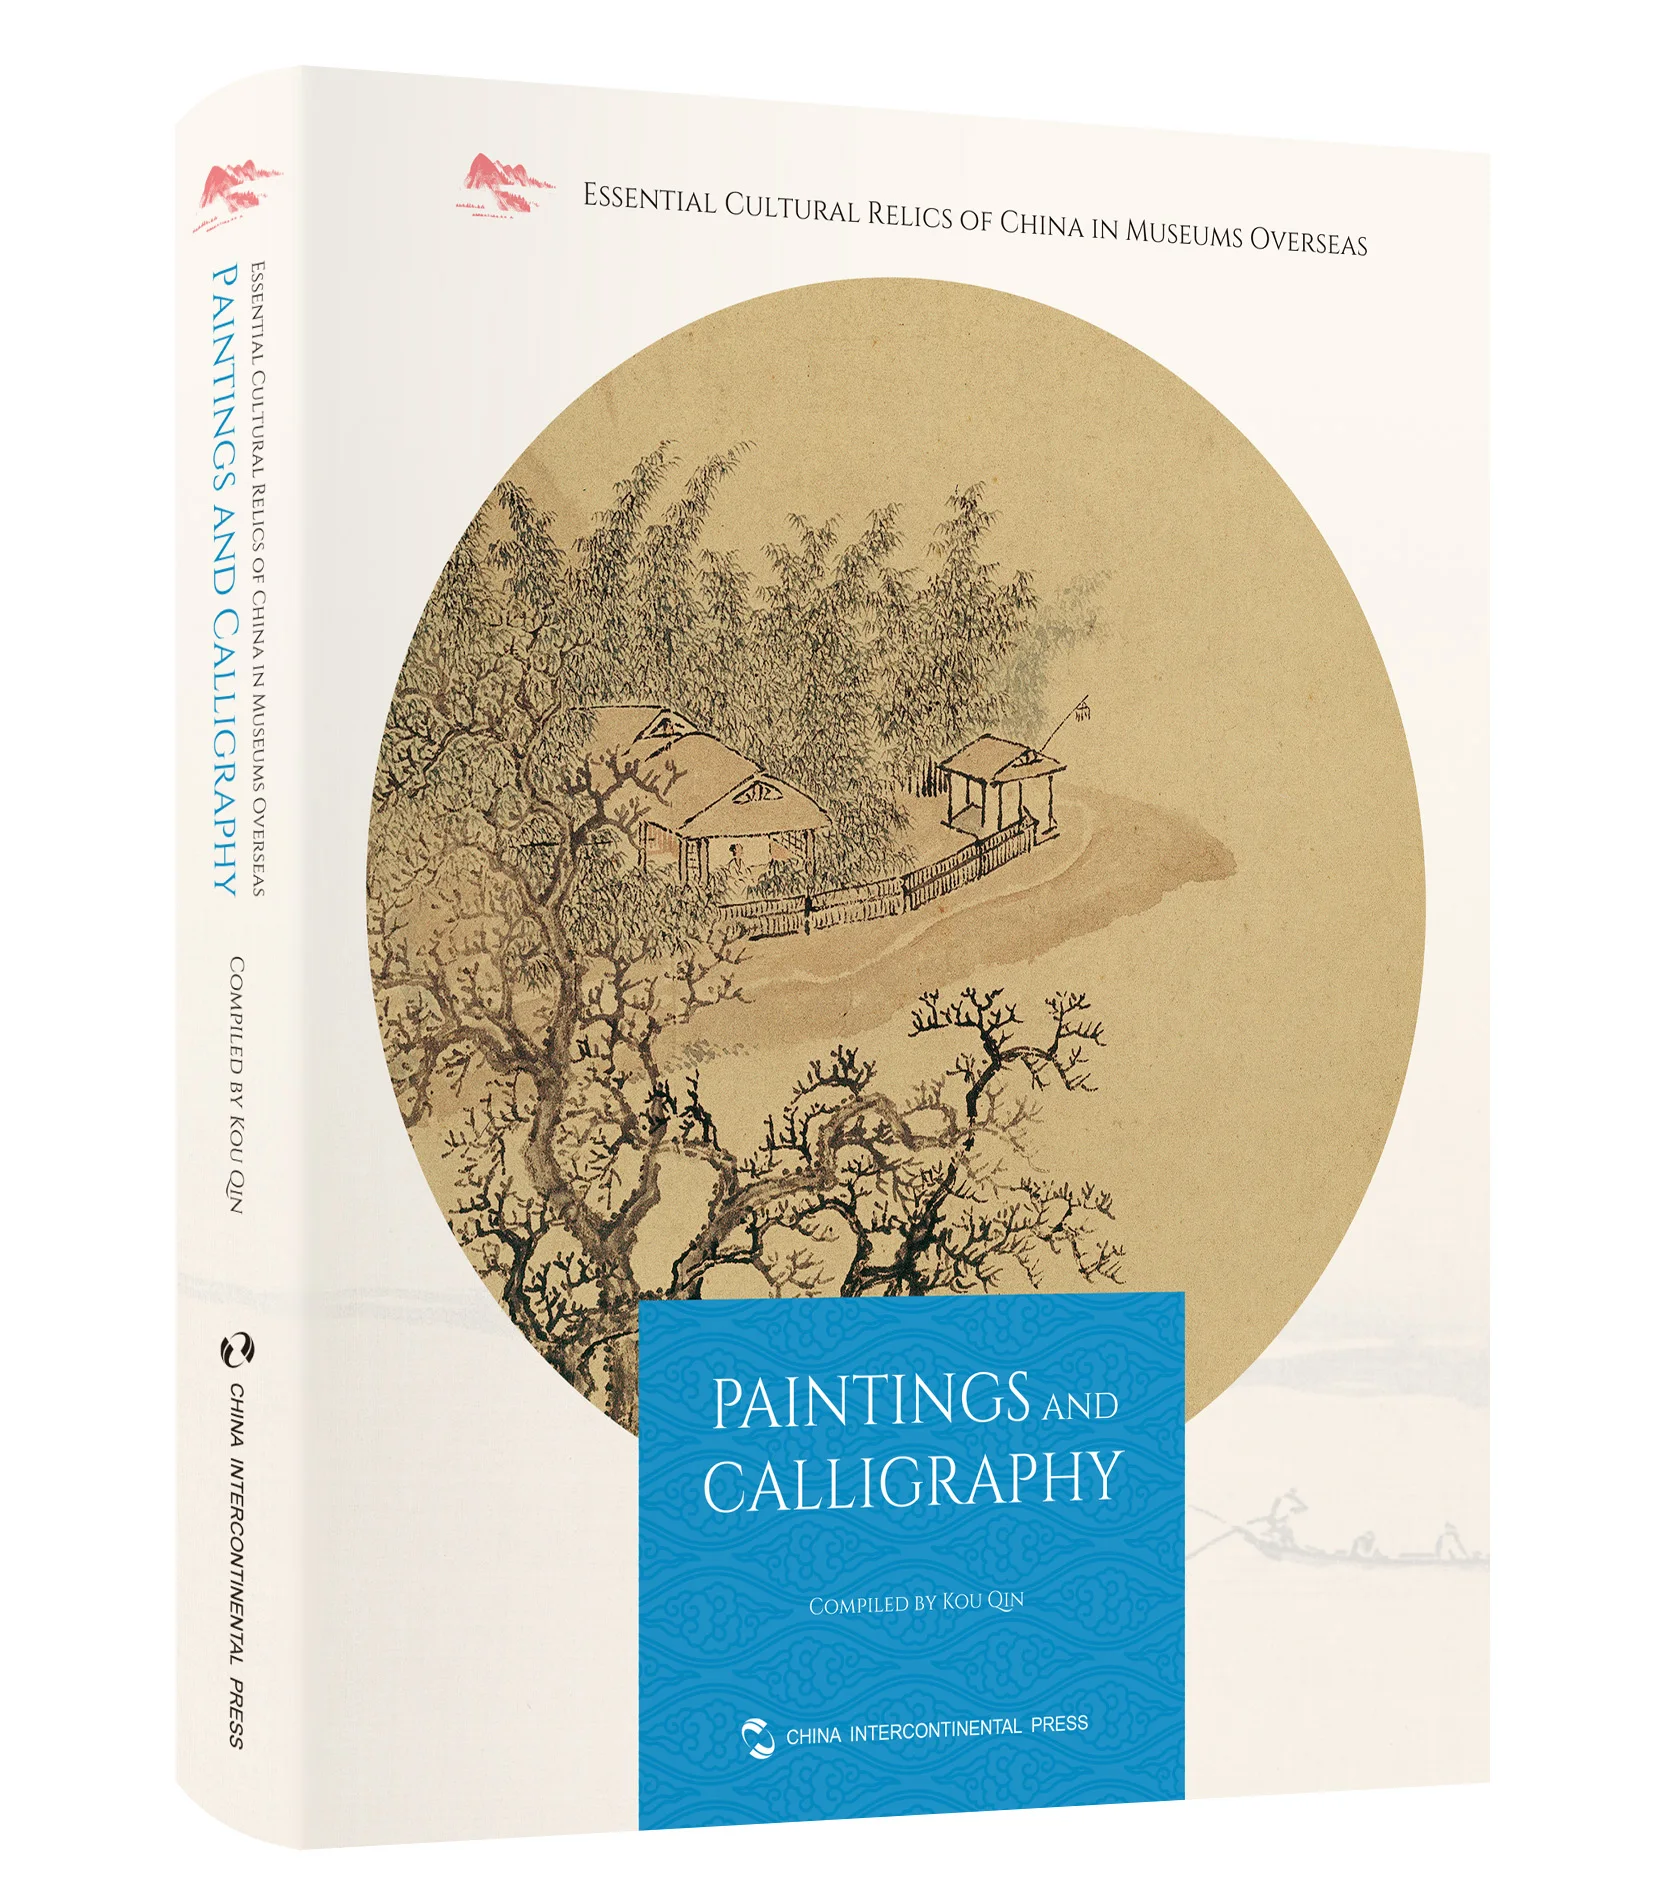 Essential Cultural Relics of China in Museums Overseas：Paintings and Calligraphy